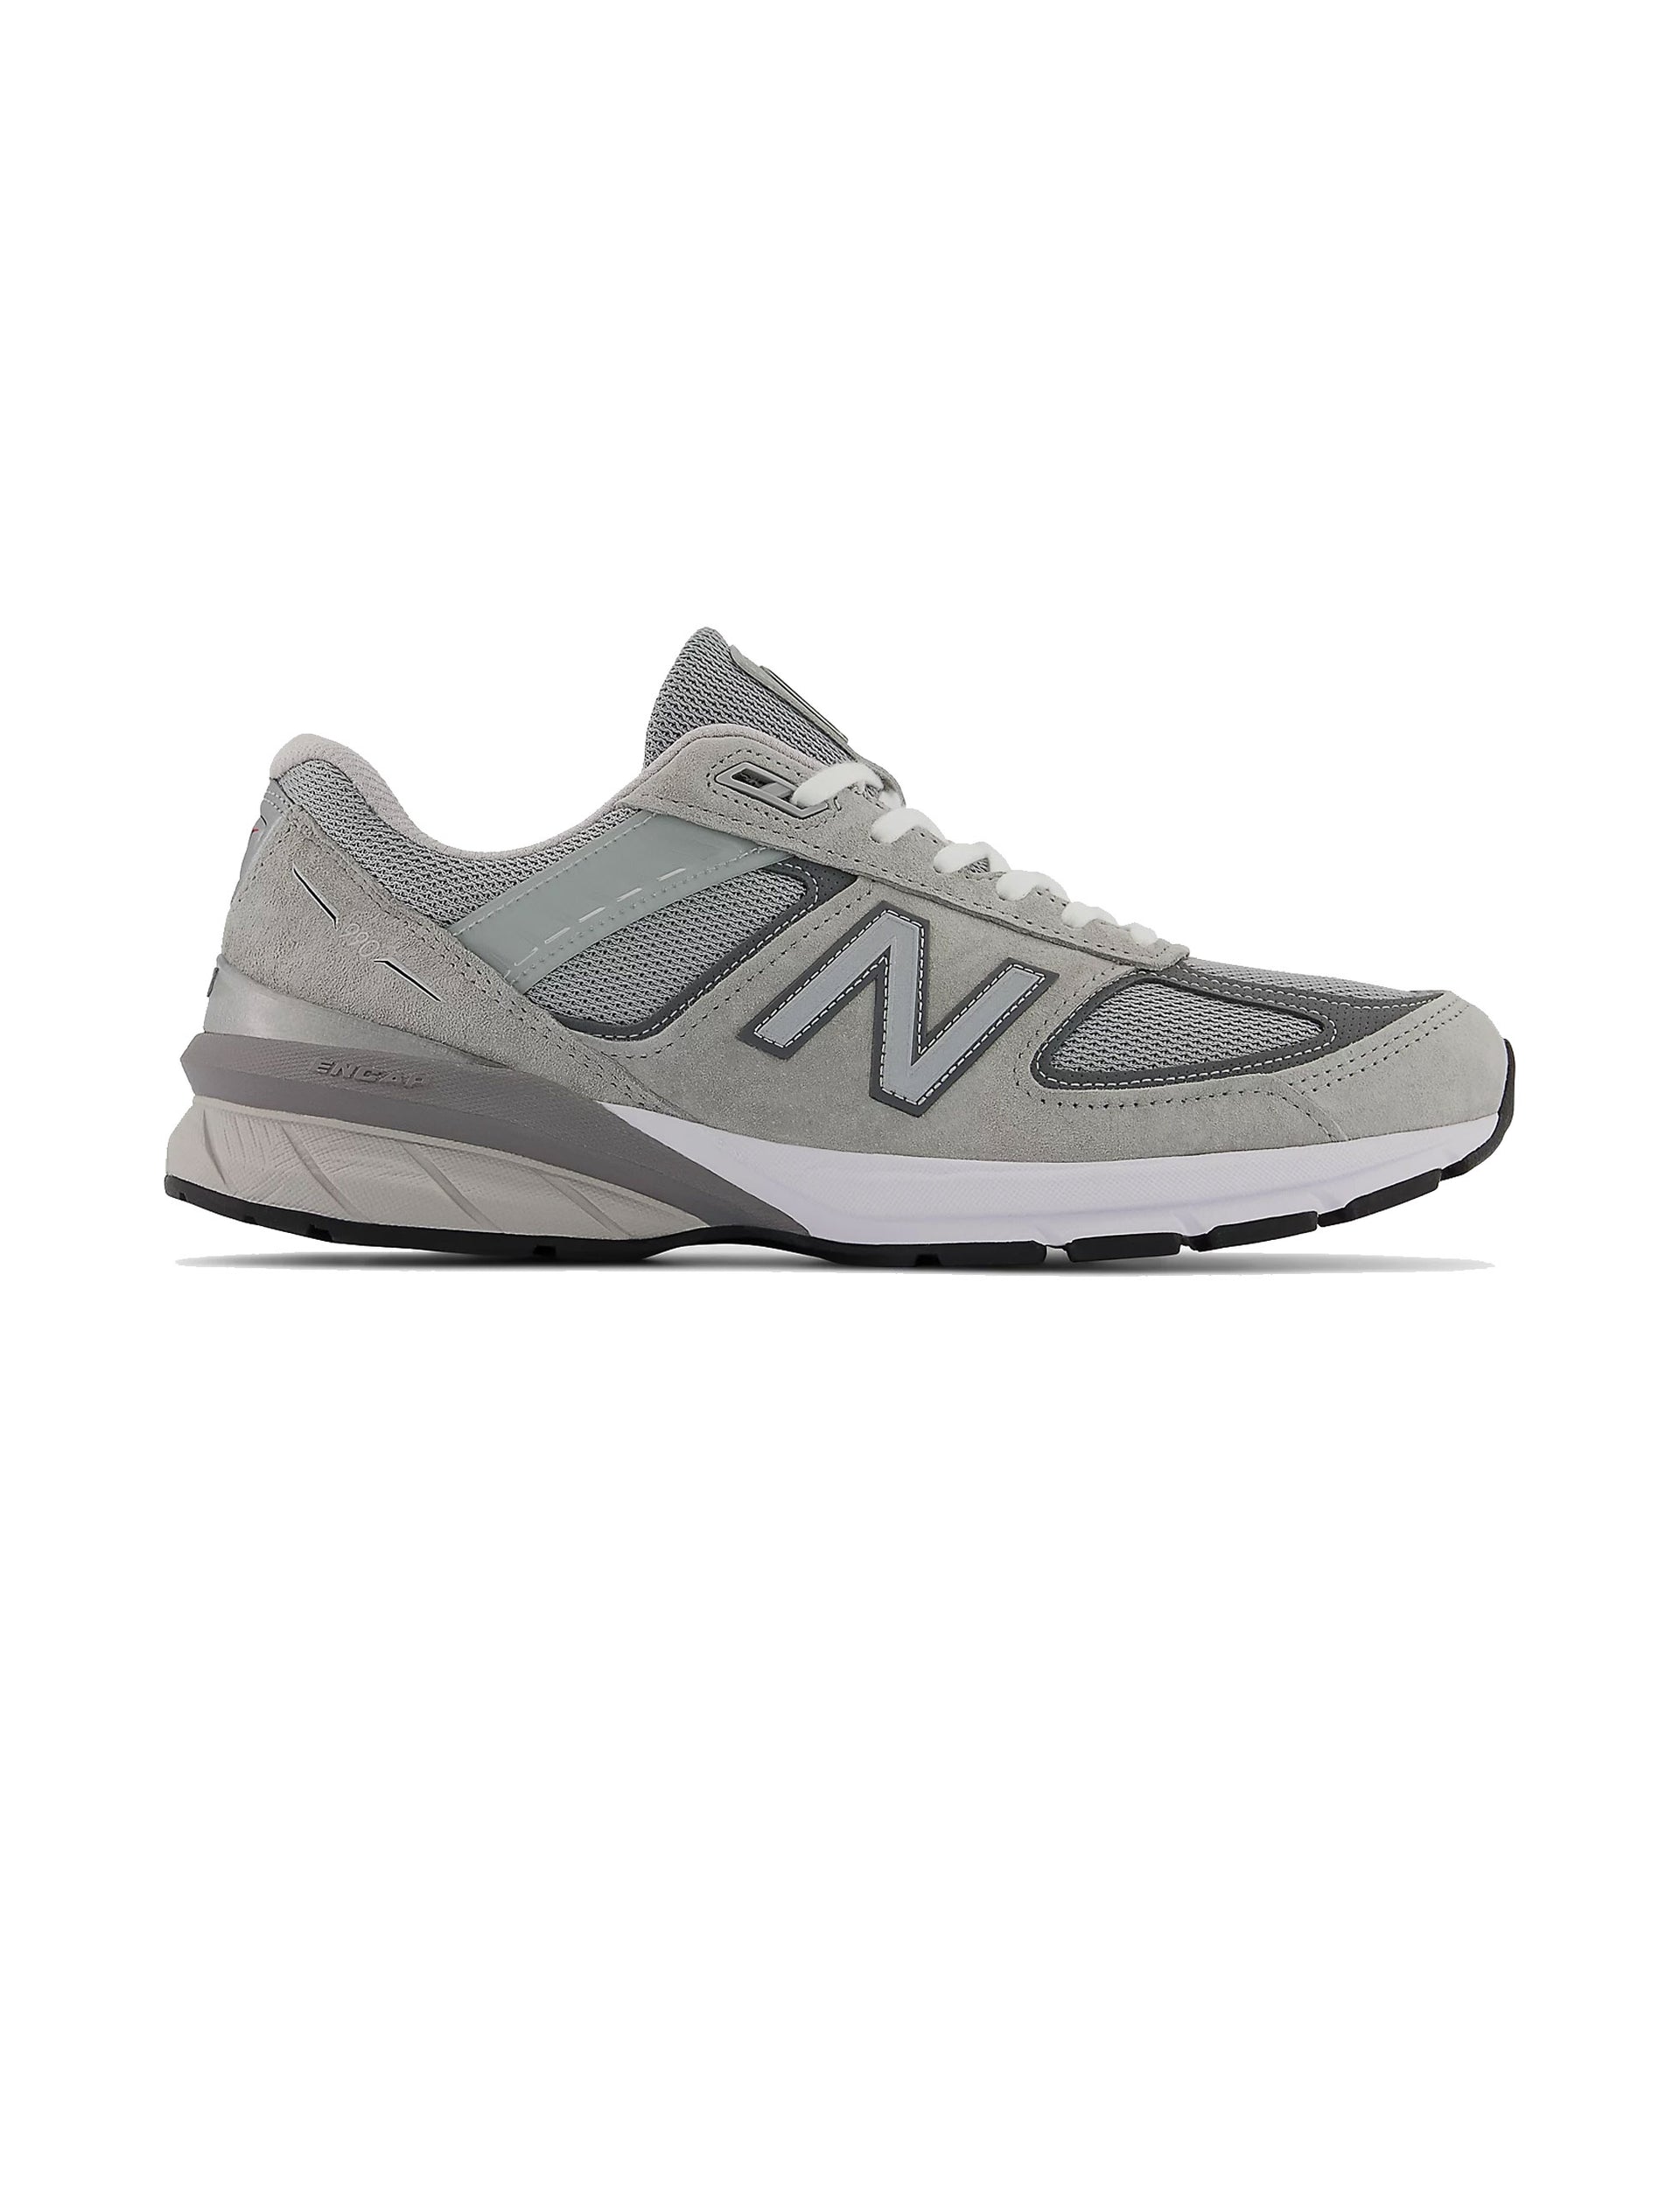 NEW BALANCE MADE in USA 990v5 Core